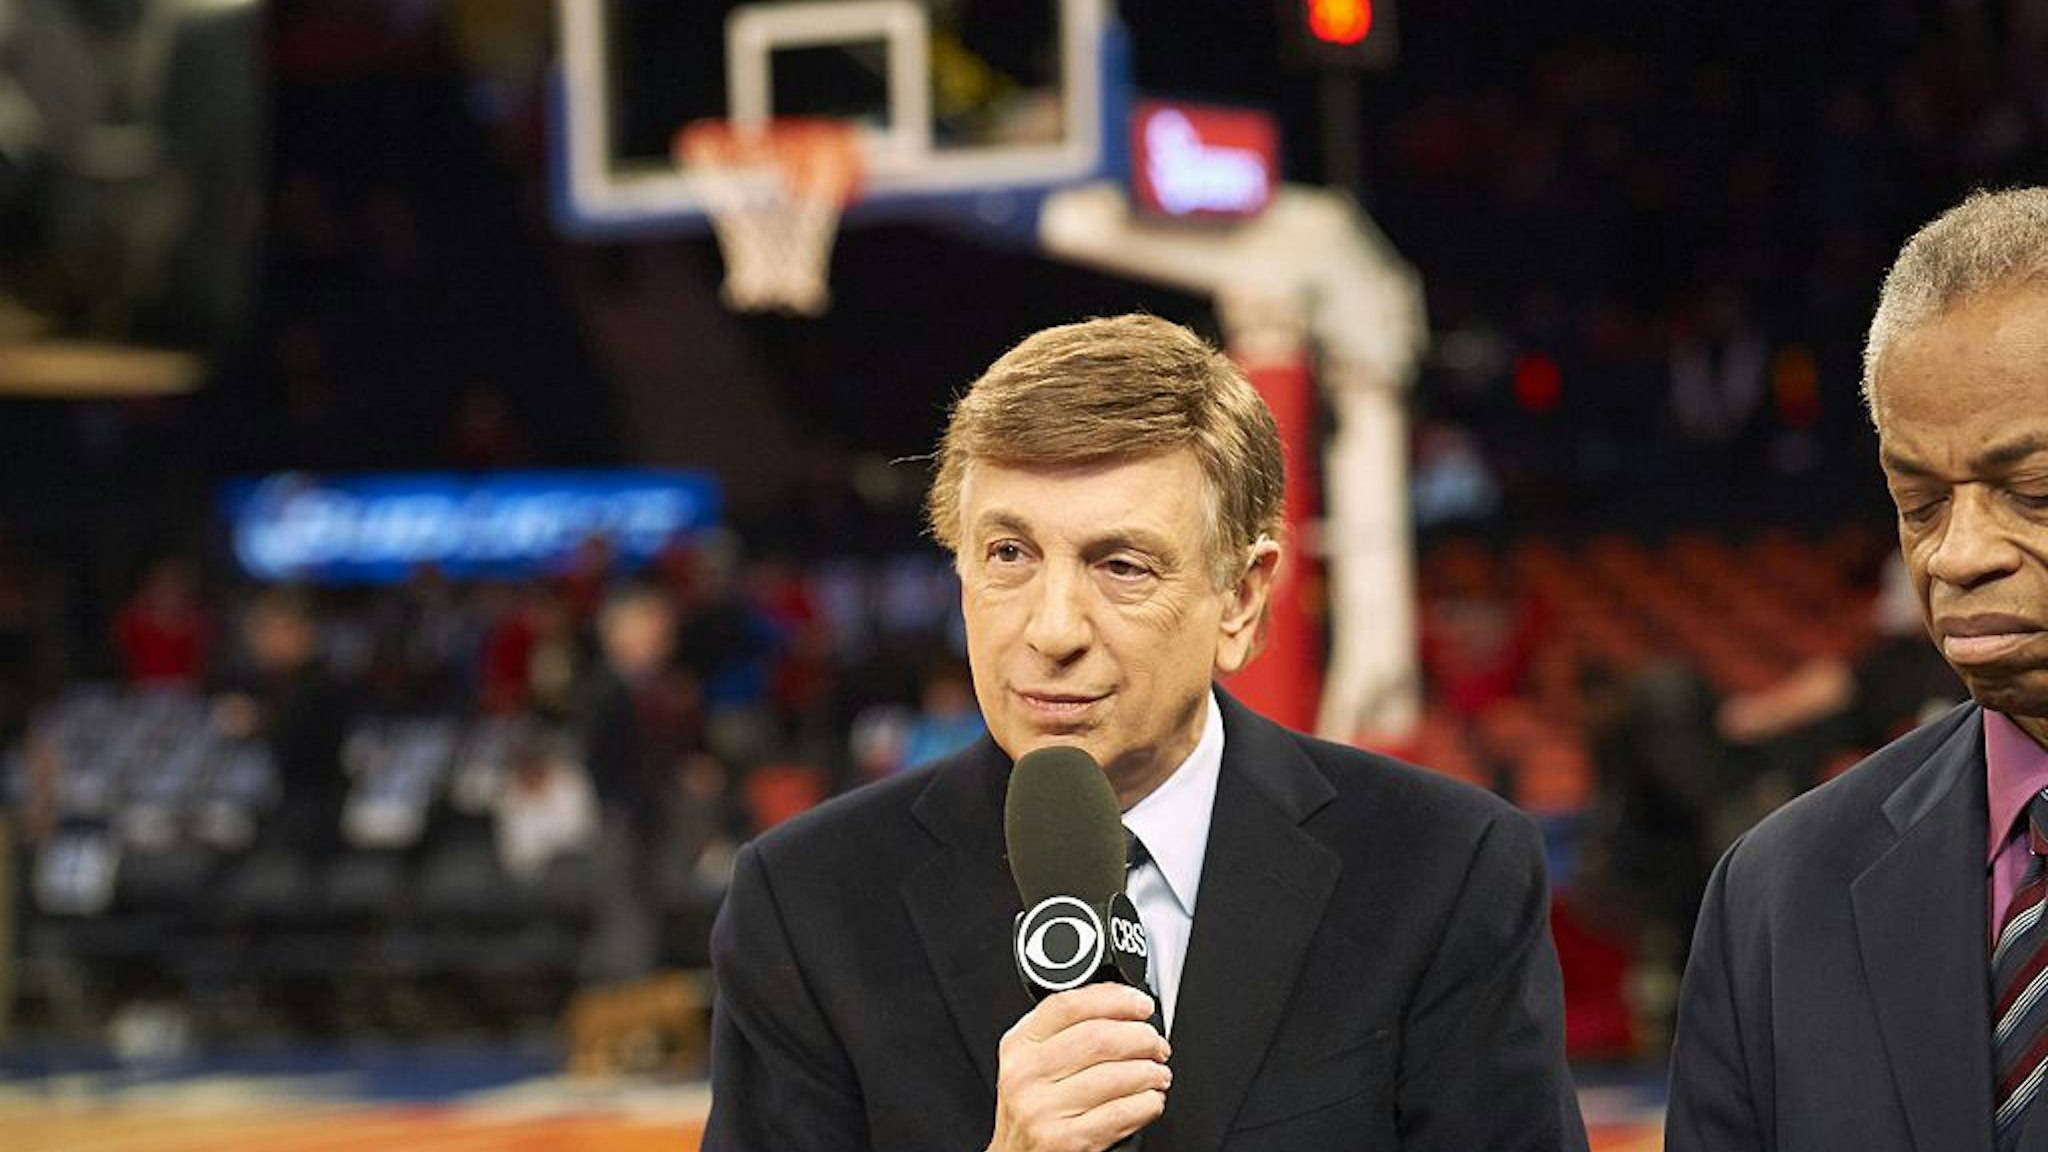 College Basketball: CBS Sports play by play announcer Marv Albert before St. John's vs Georgetown game at Madison Square Garden. New York, NY 2/28/2015 CREDIT: Porter Binks (Photo by Porter Binks /Sports Illustrated via Getty Images) (Set Number: X159305 TK1 )